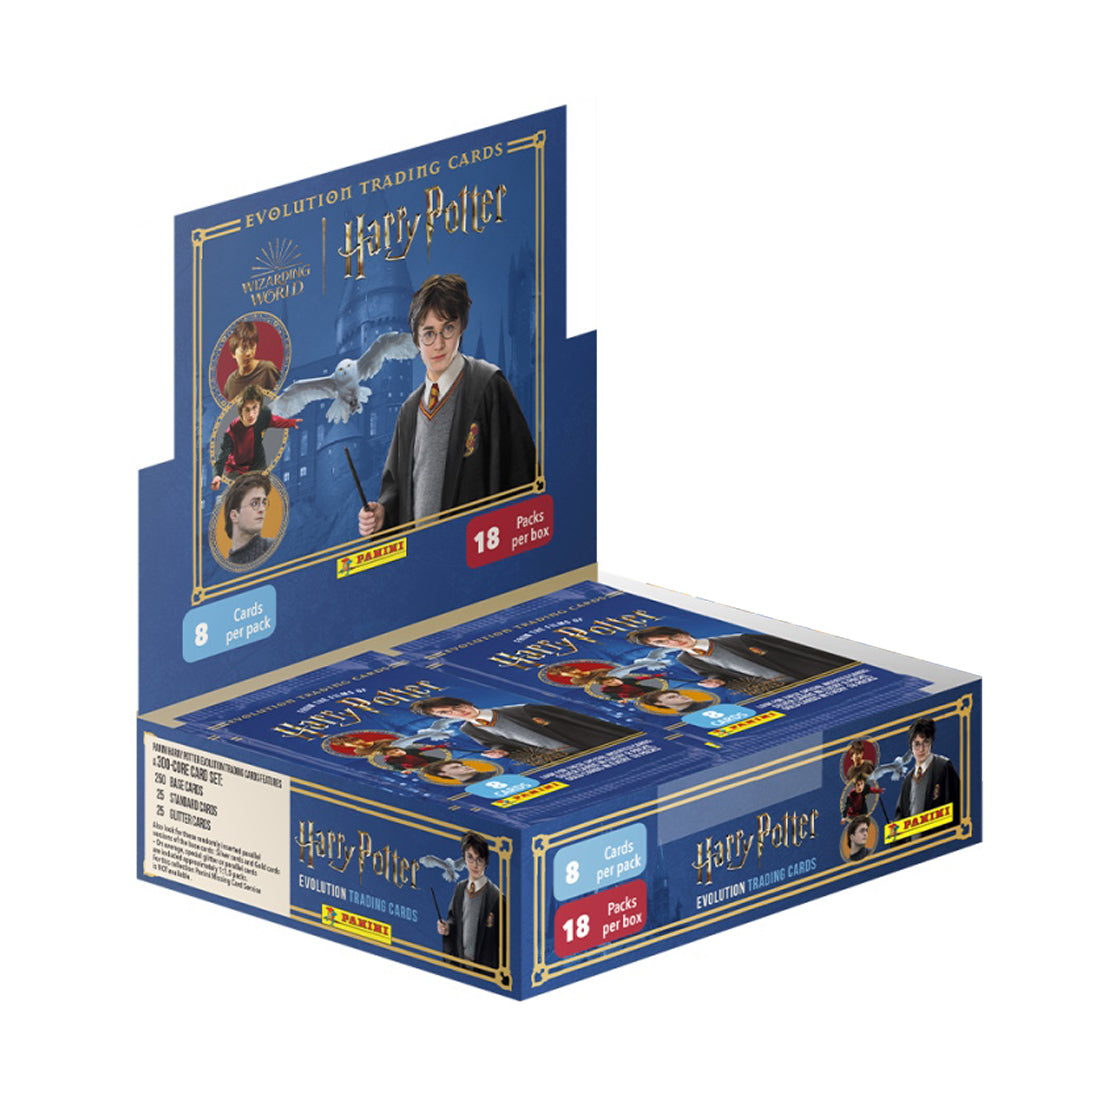 HARRY POTTER EVOLUTION TRADING CARDS - 18-PACK BOX (144 CARDS)